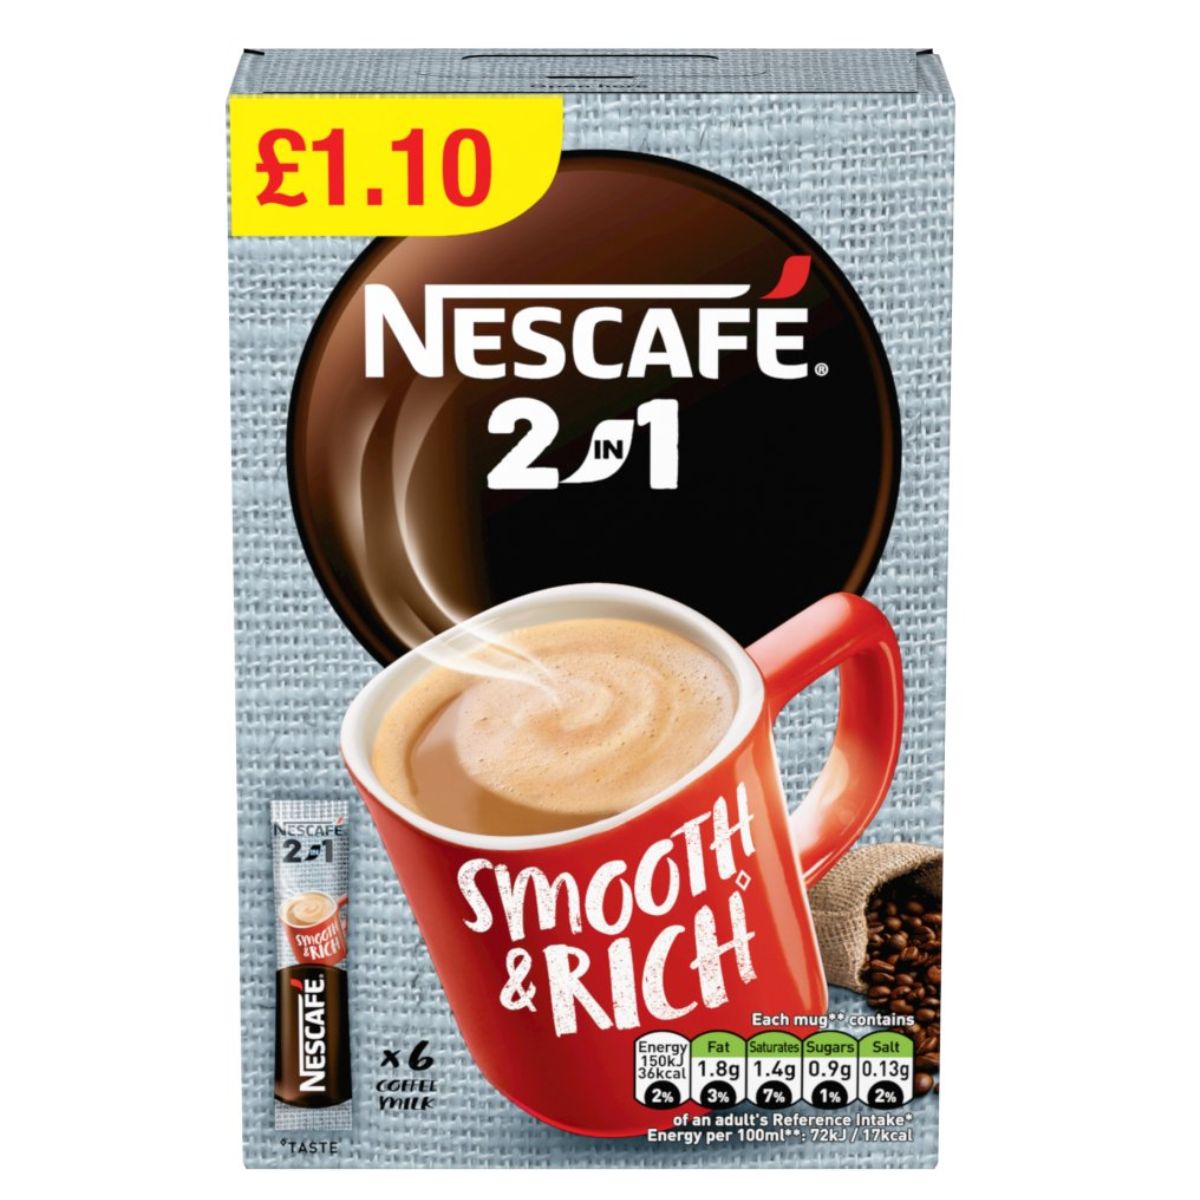 A package of Nescafe - 2in1 Instant Coffee - 6 x 9g showing a mug of coffee, priced at £1.10, highlighting its smooth and rich flavor. the pack contains 6 sachets.